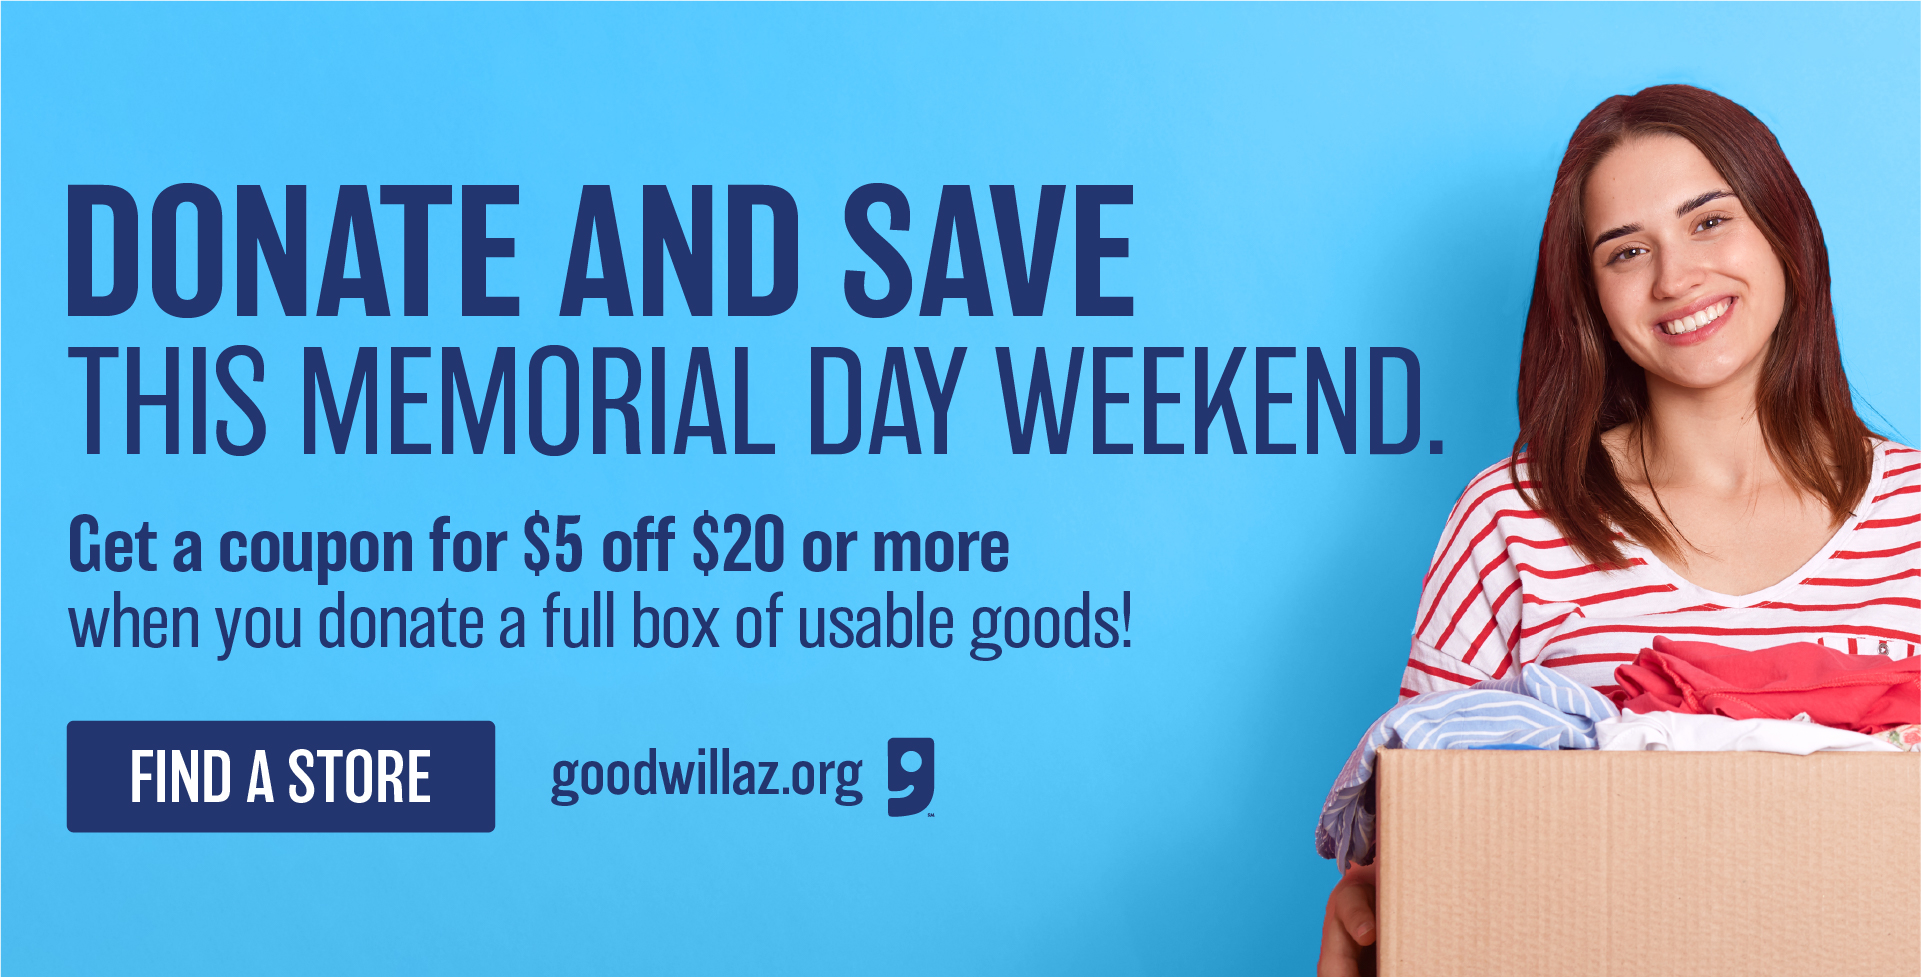 Donate and save this Memorial Day Weekend. Get a $5 off coupon when you donate a full box of usable goods! Find A Store GoodwillAZ.org